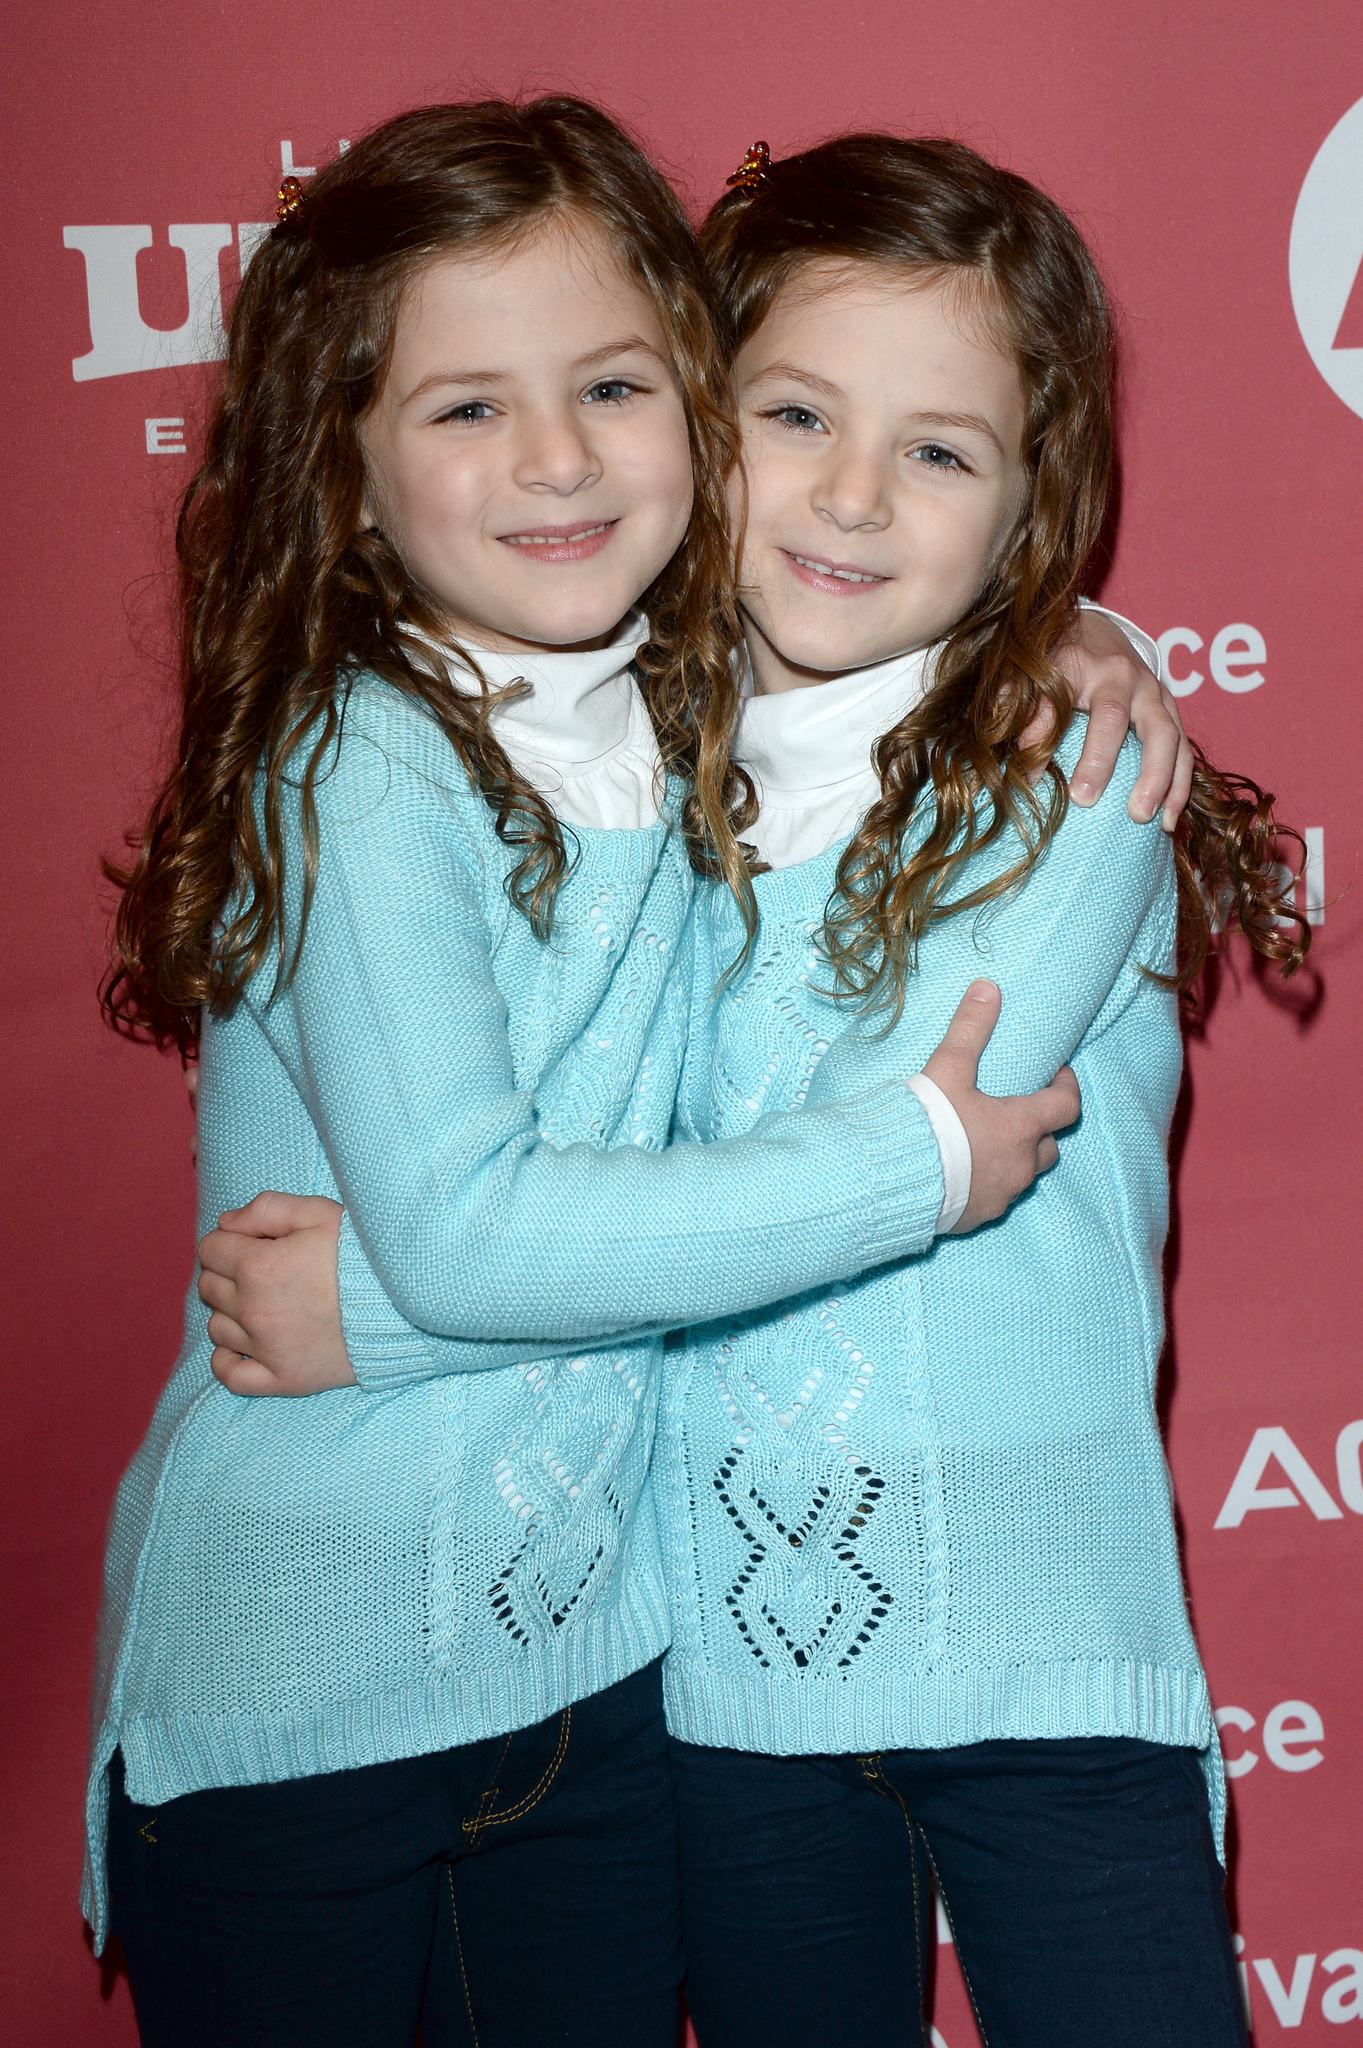 Aundrea Gadsby and Gia Gadsby at event of People Places Things (2015)